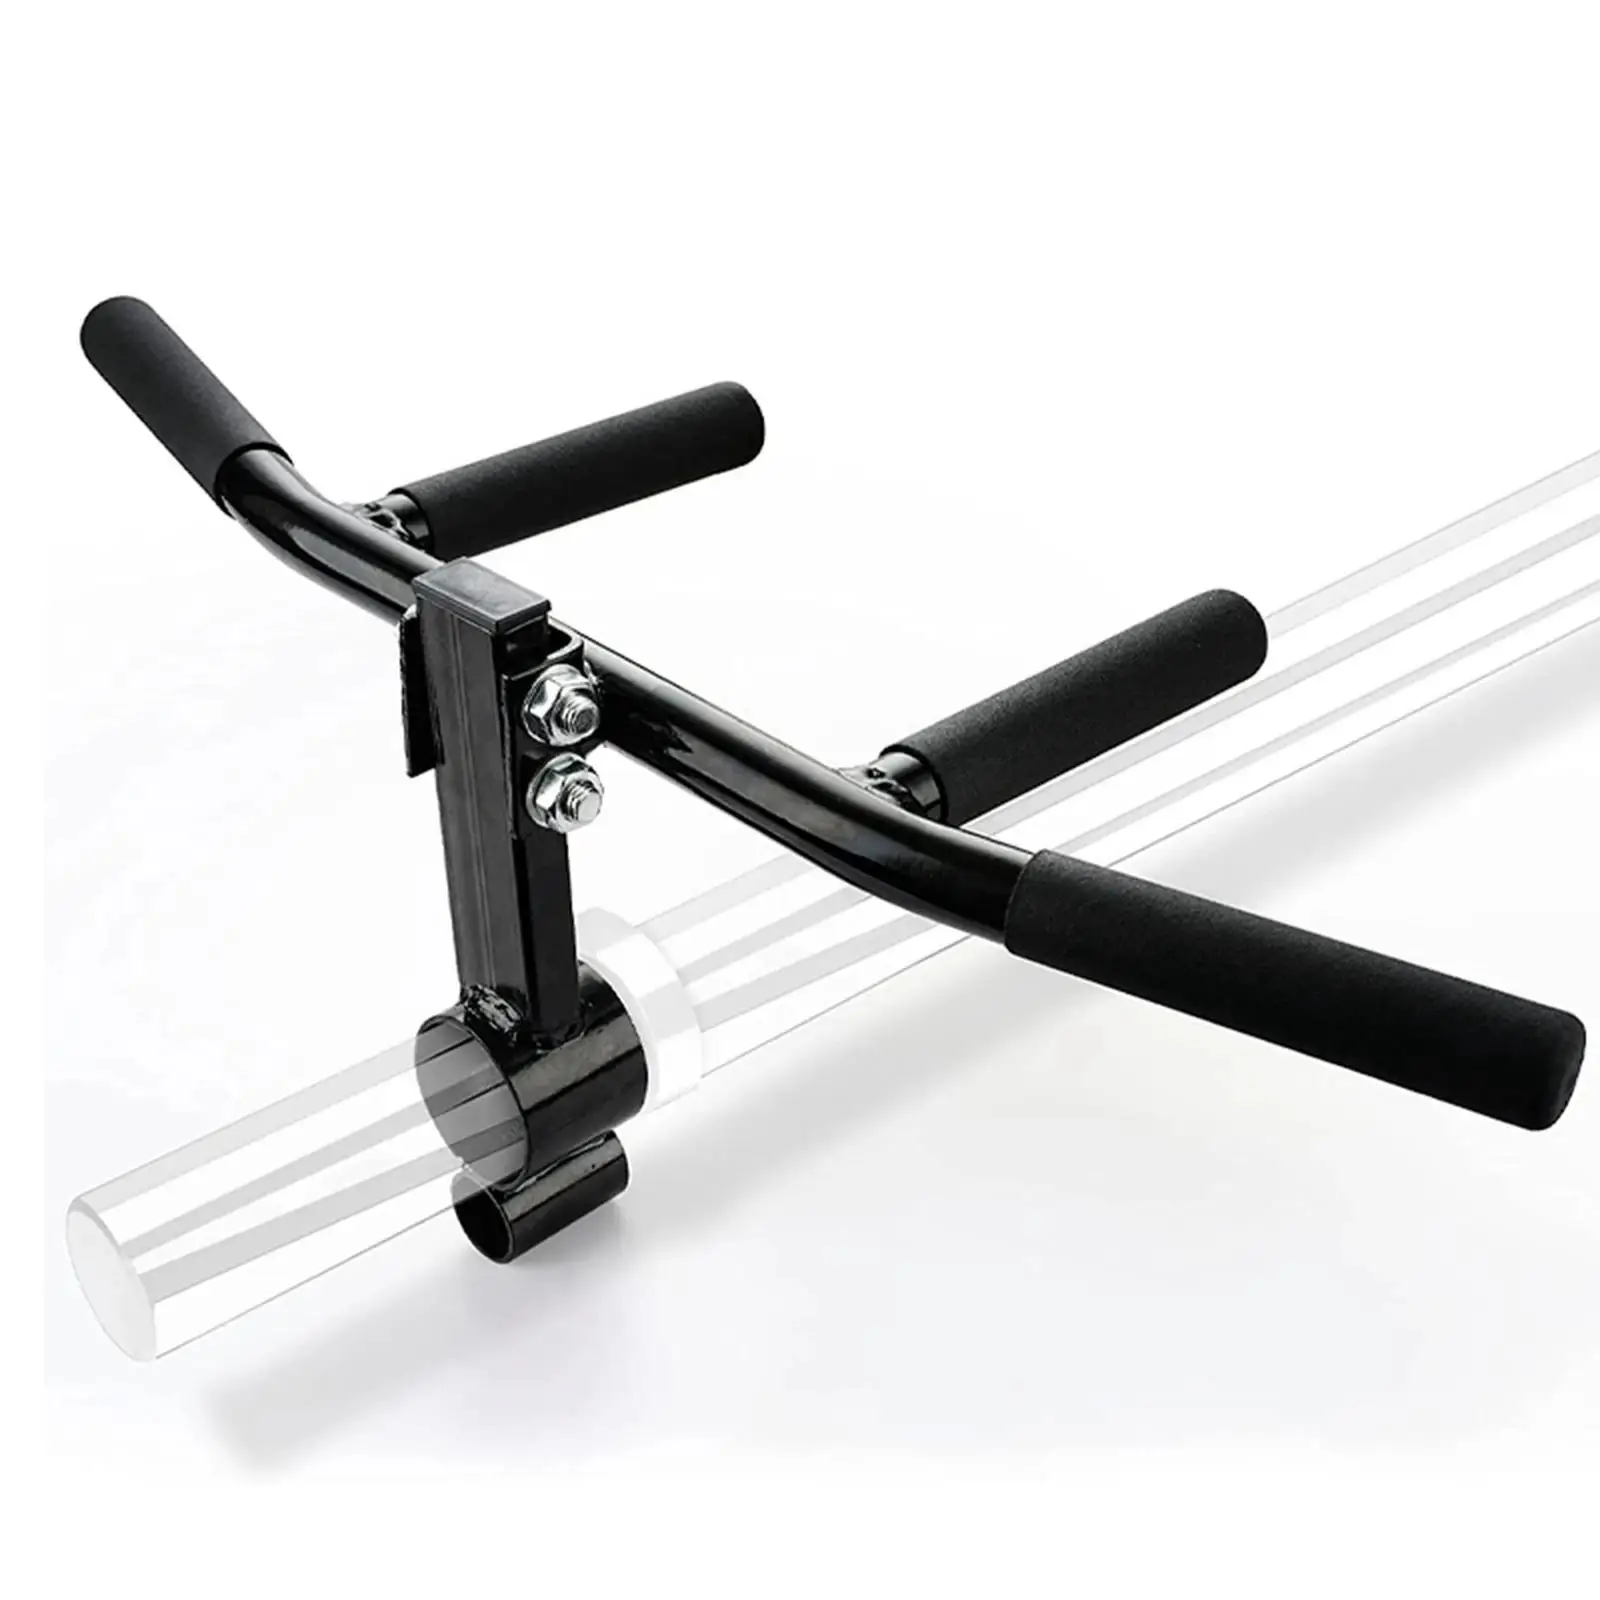 T Bar Row Landmine Attachment Fitness Fits Standard Bar Straight Grip for Barbell Squats Weight Lifting Biceps Strengthens Back